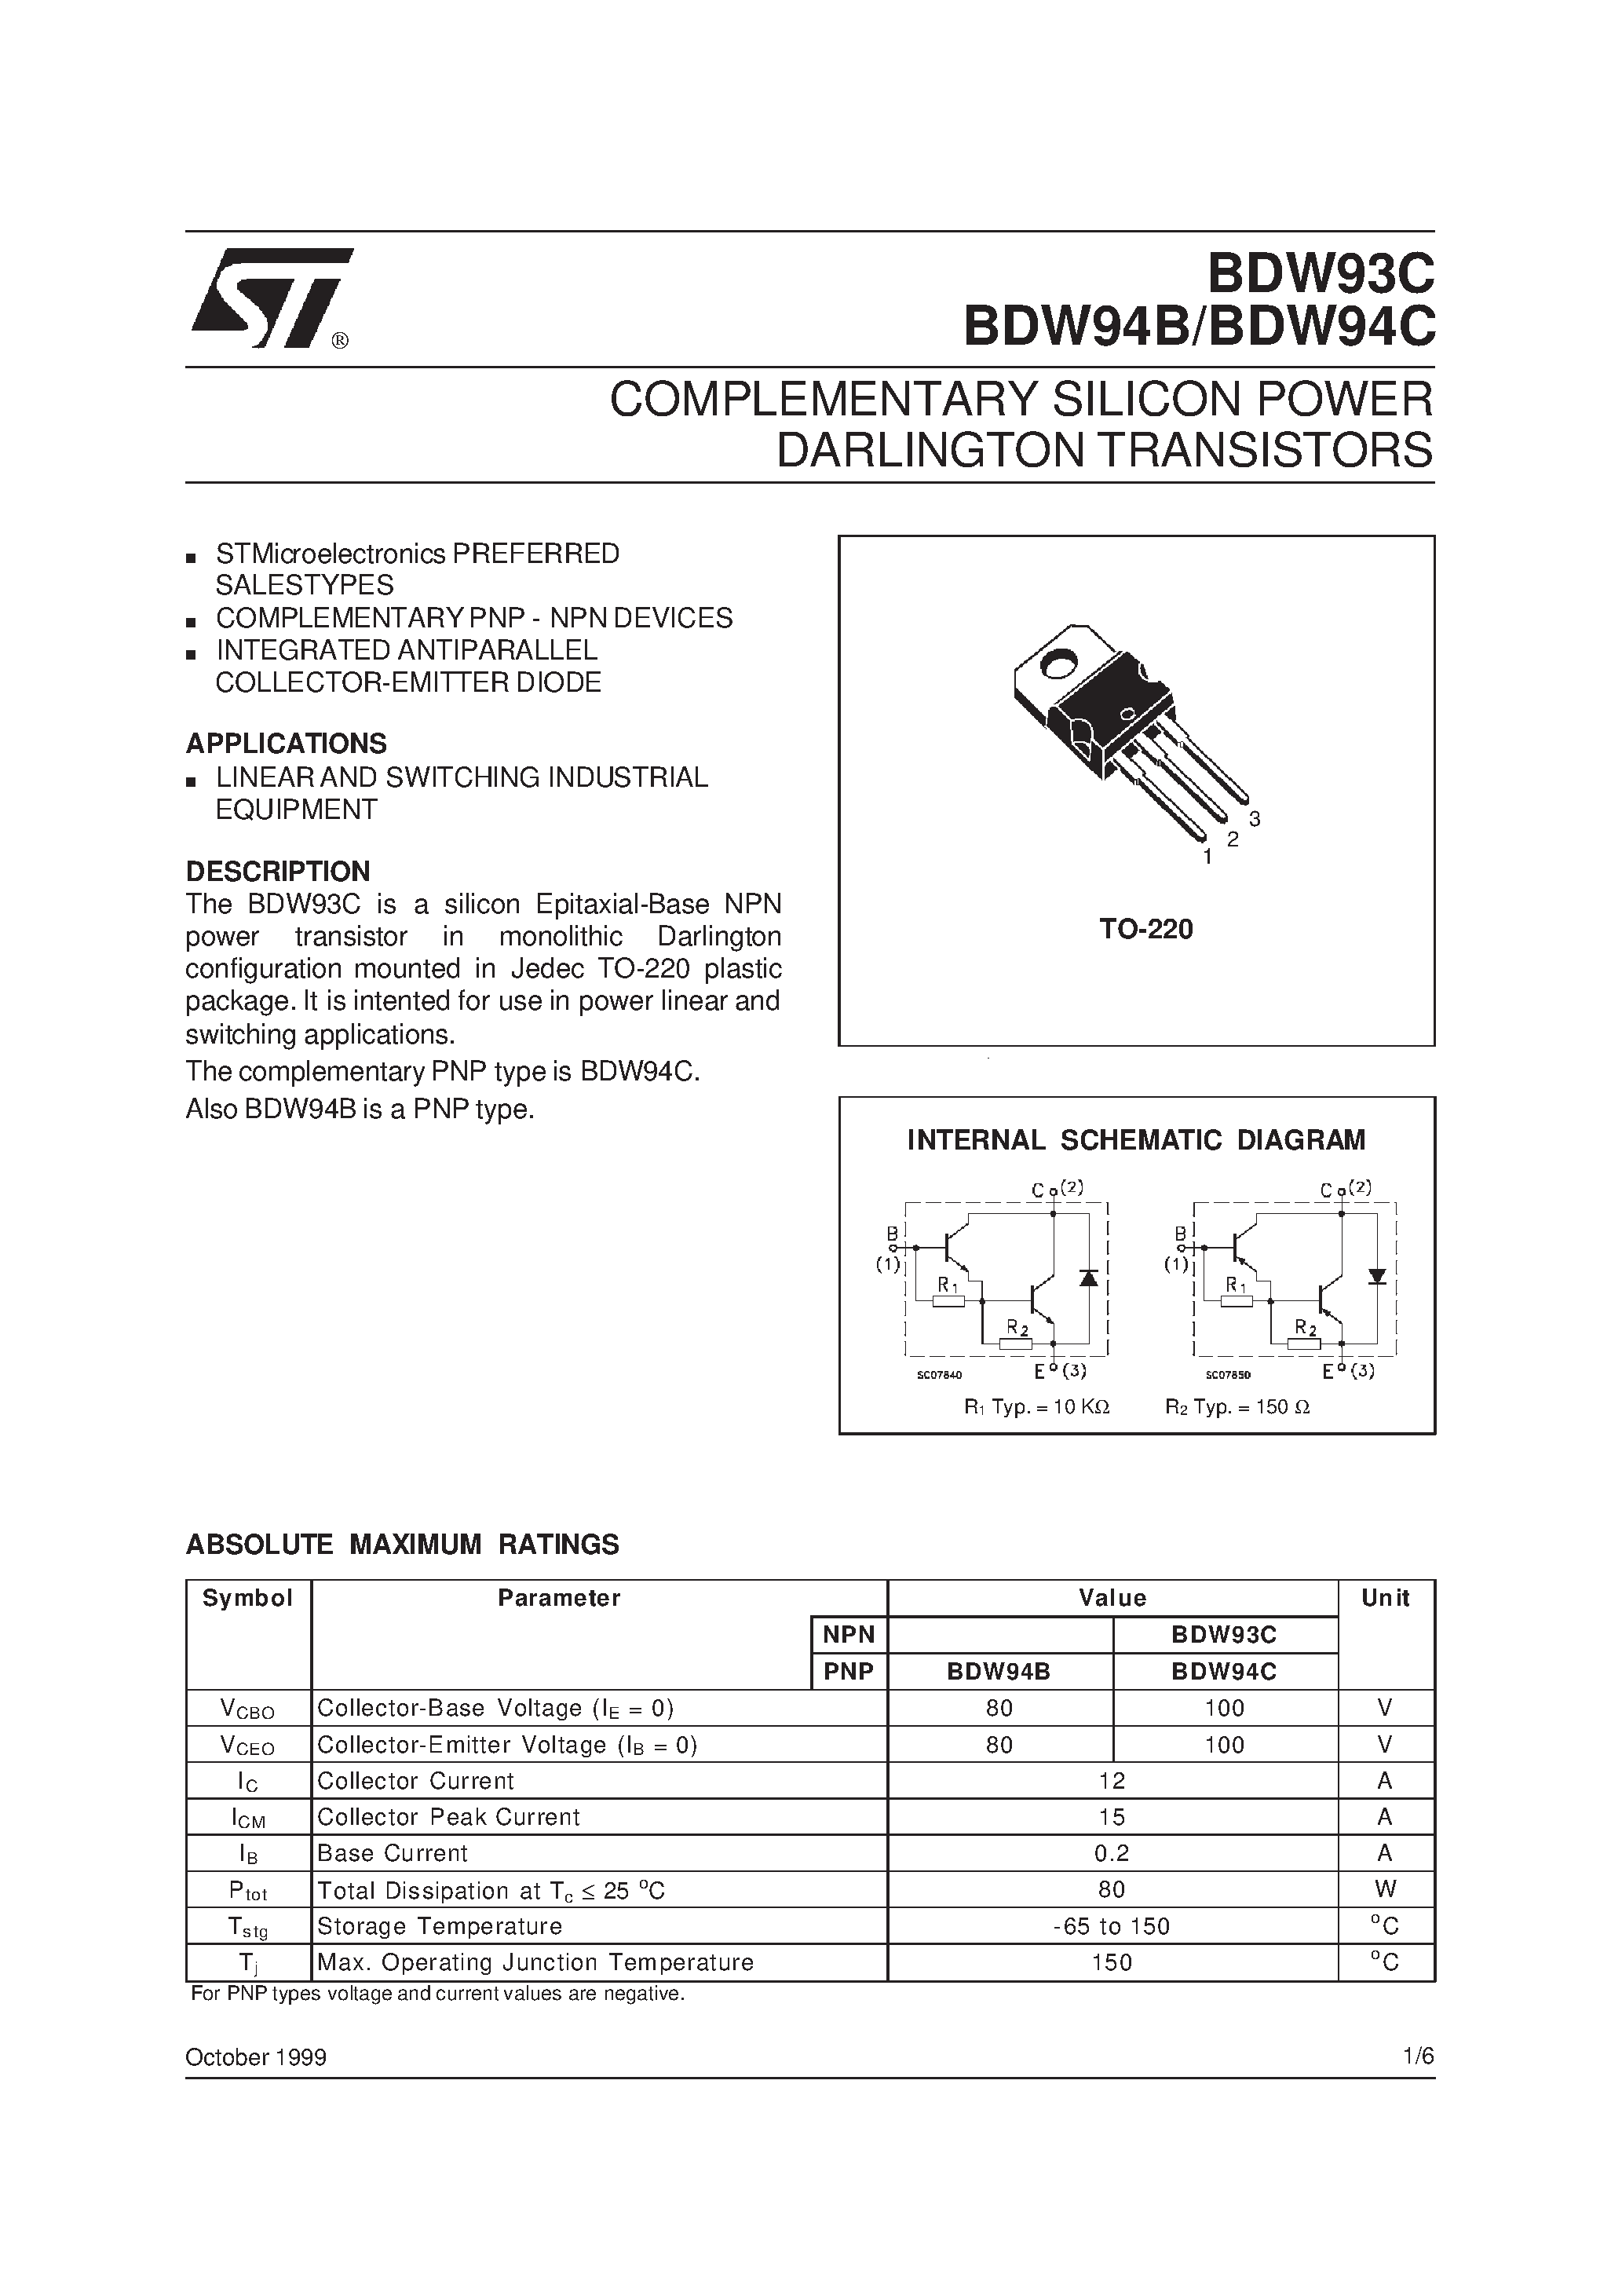 Datasheet BDW93C - COMPLEMENTARY SILICON POWER DARLINGTON TRANSISTORS page 1